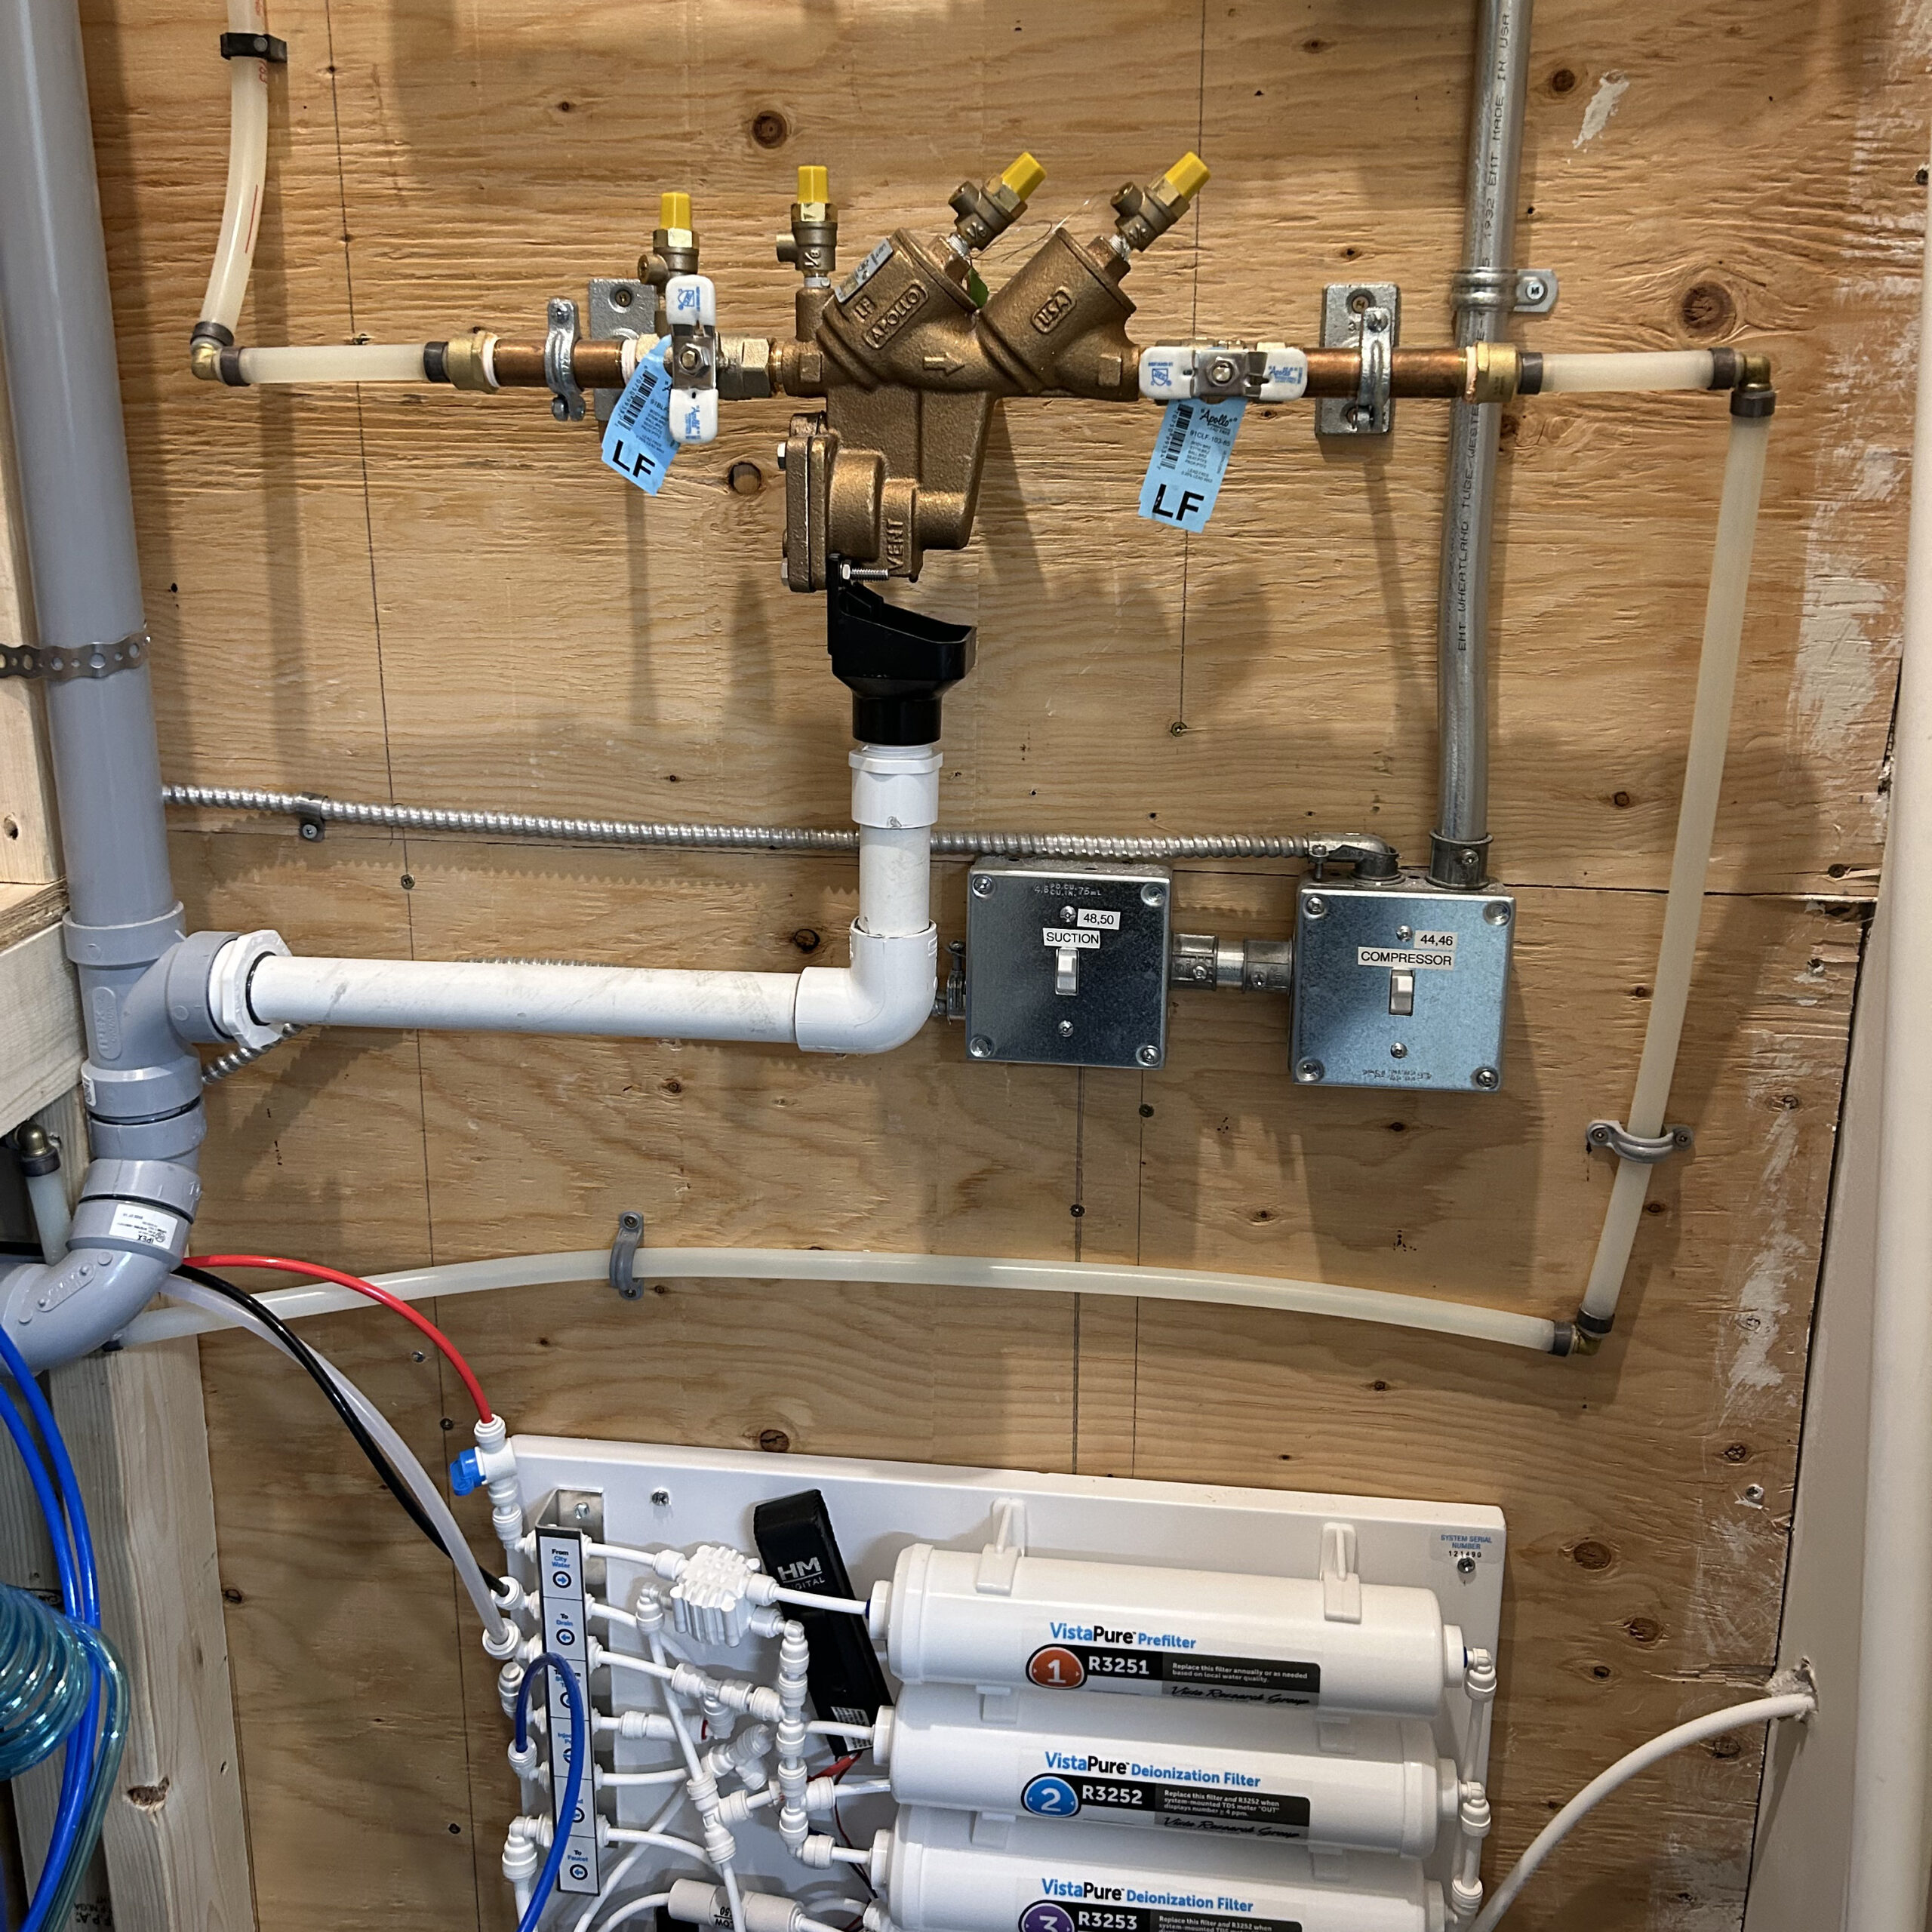 Water pipes and filtration system connected in house's utilities area.